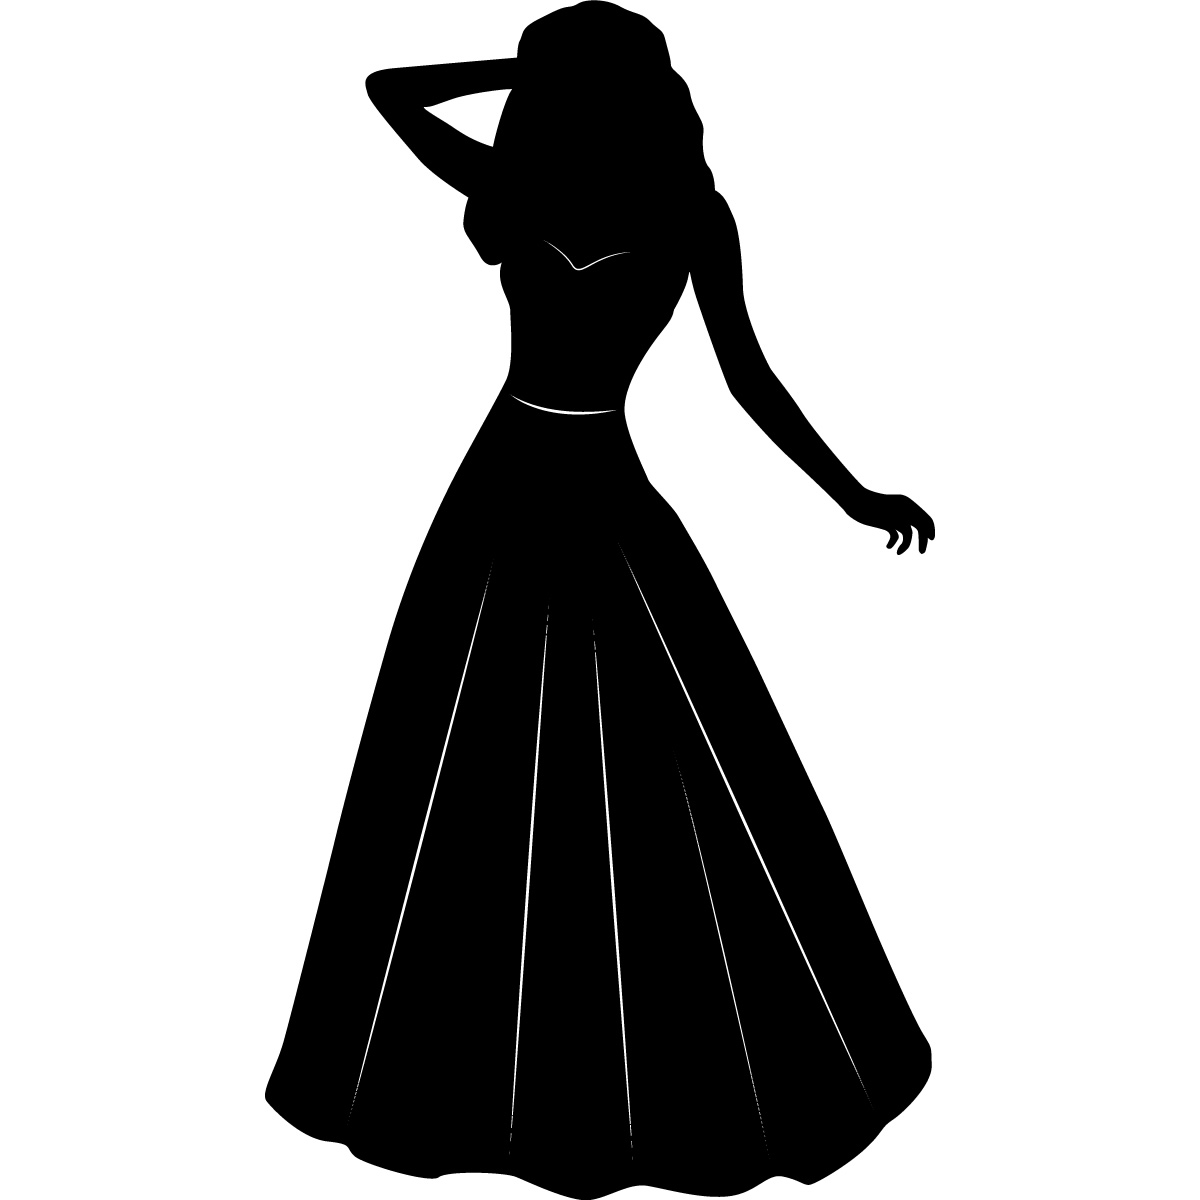 Woman in dress clipart